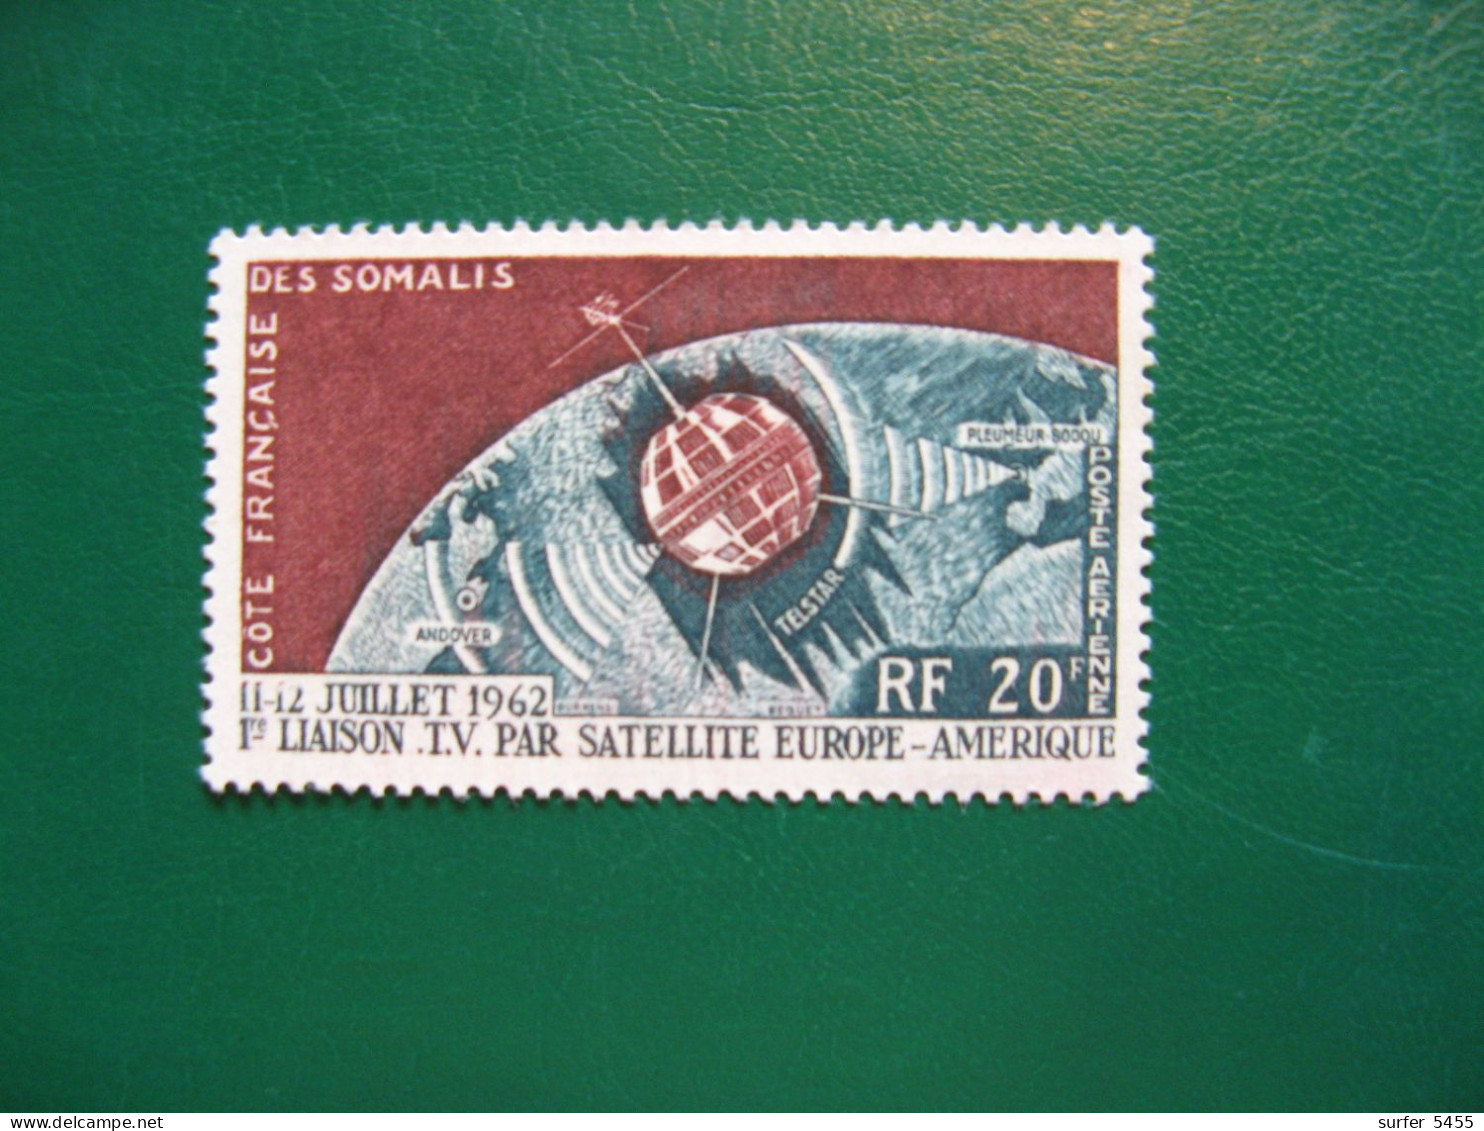 COTE DES SOMALIS - YVERT POSTE AERIENNE N° 33 - TIMBRE NEUF** LUXE - MNH - COTE 2,00 EUROS - Unused Stamps